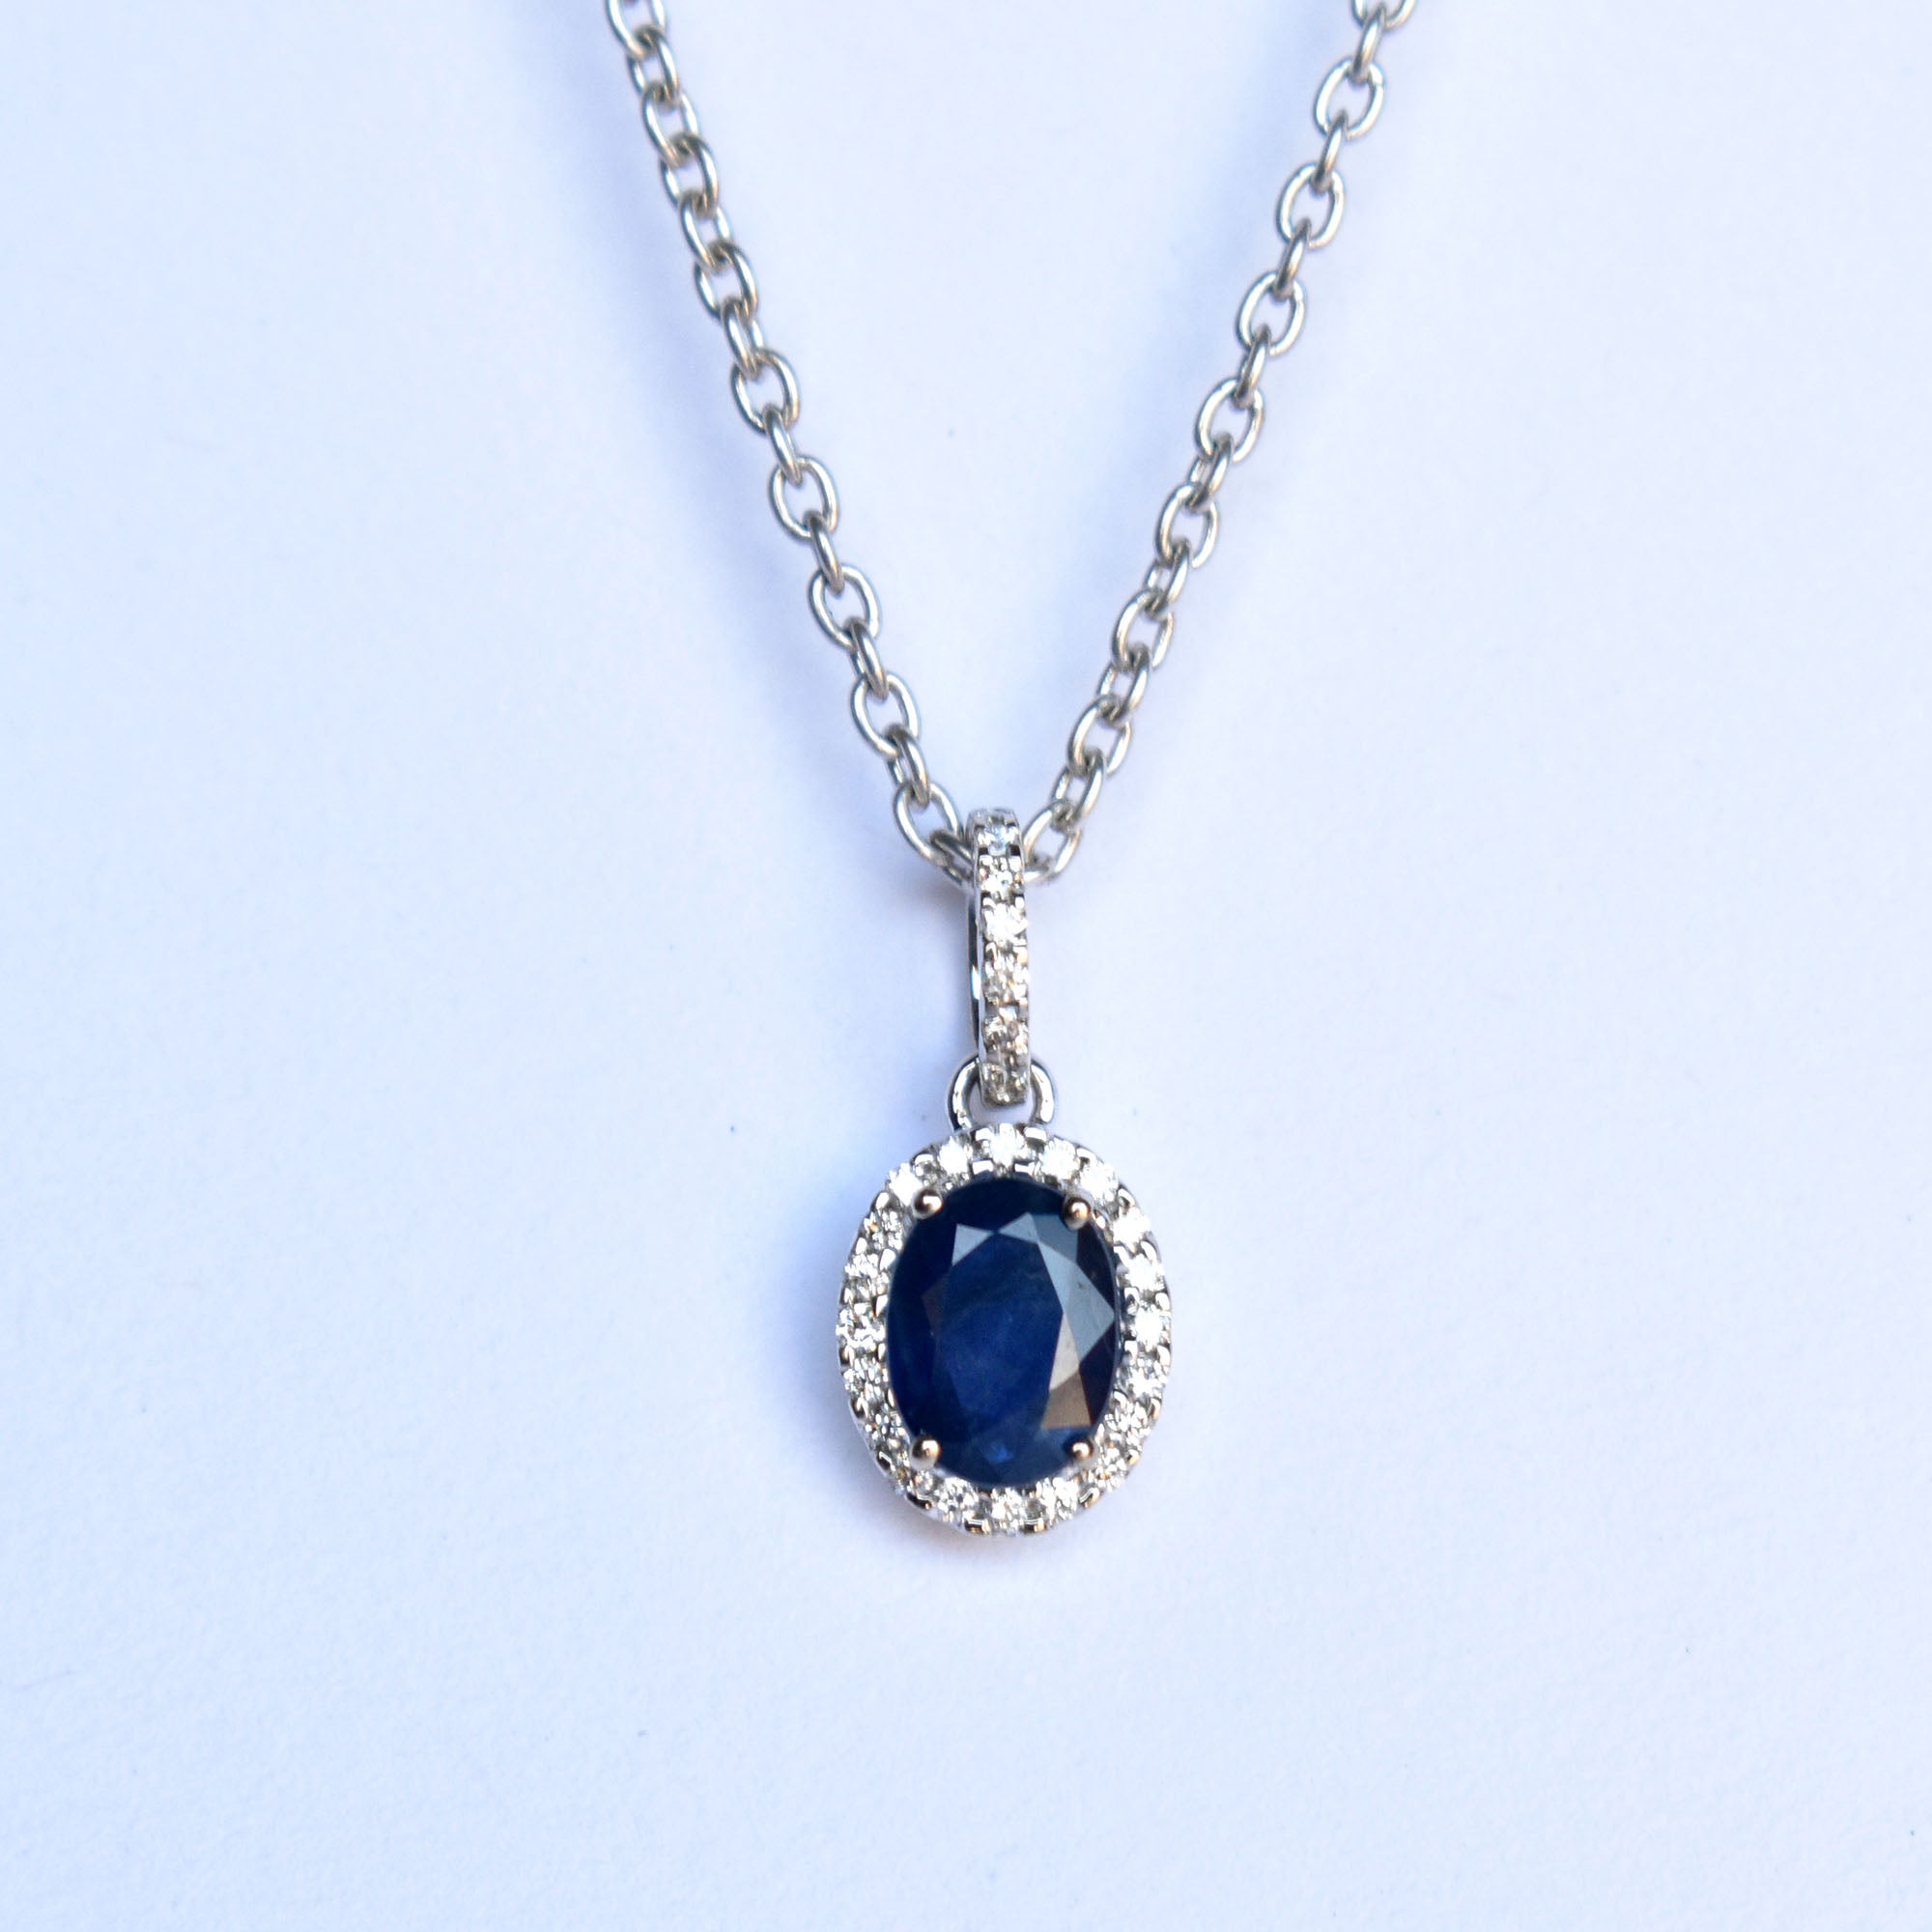 Hand Crafted Rose Cut Black Diamond Necklace, 3.05 Ct. Diamond Necklace,  14K Rose Gold Halo Diamond Pendant